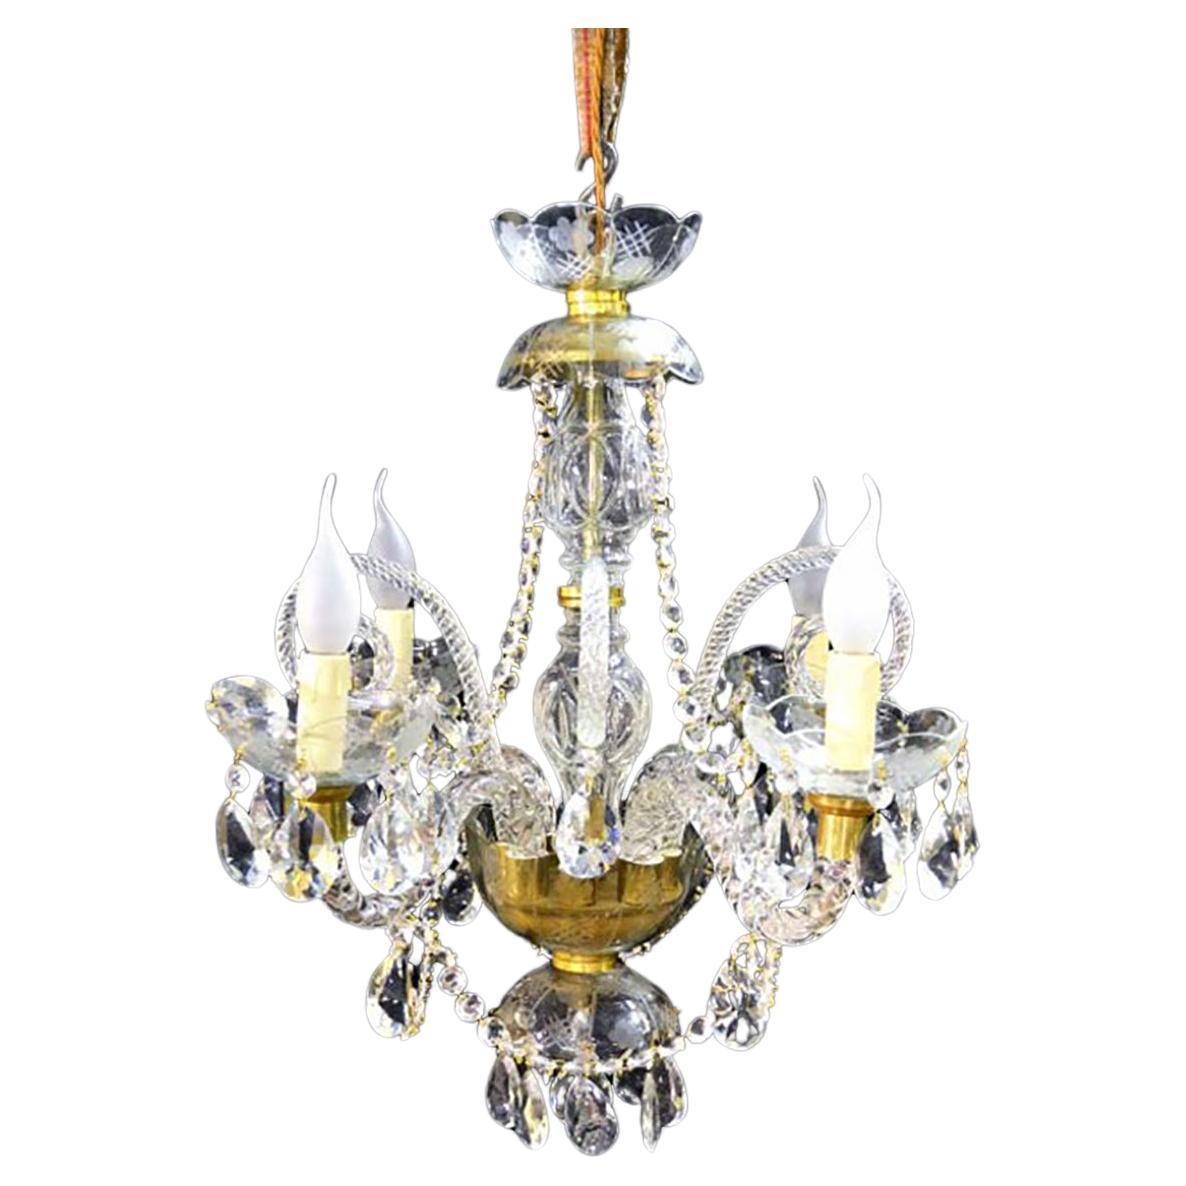 Vintage Small Venetian 4 Light Crystal Chandelier 20th Century For Sale